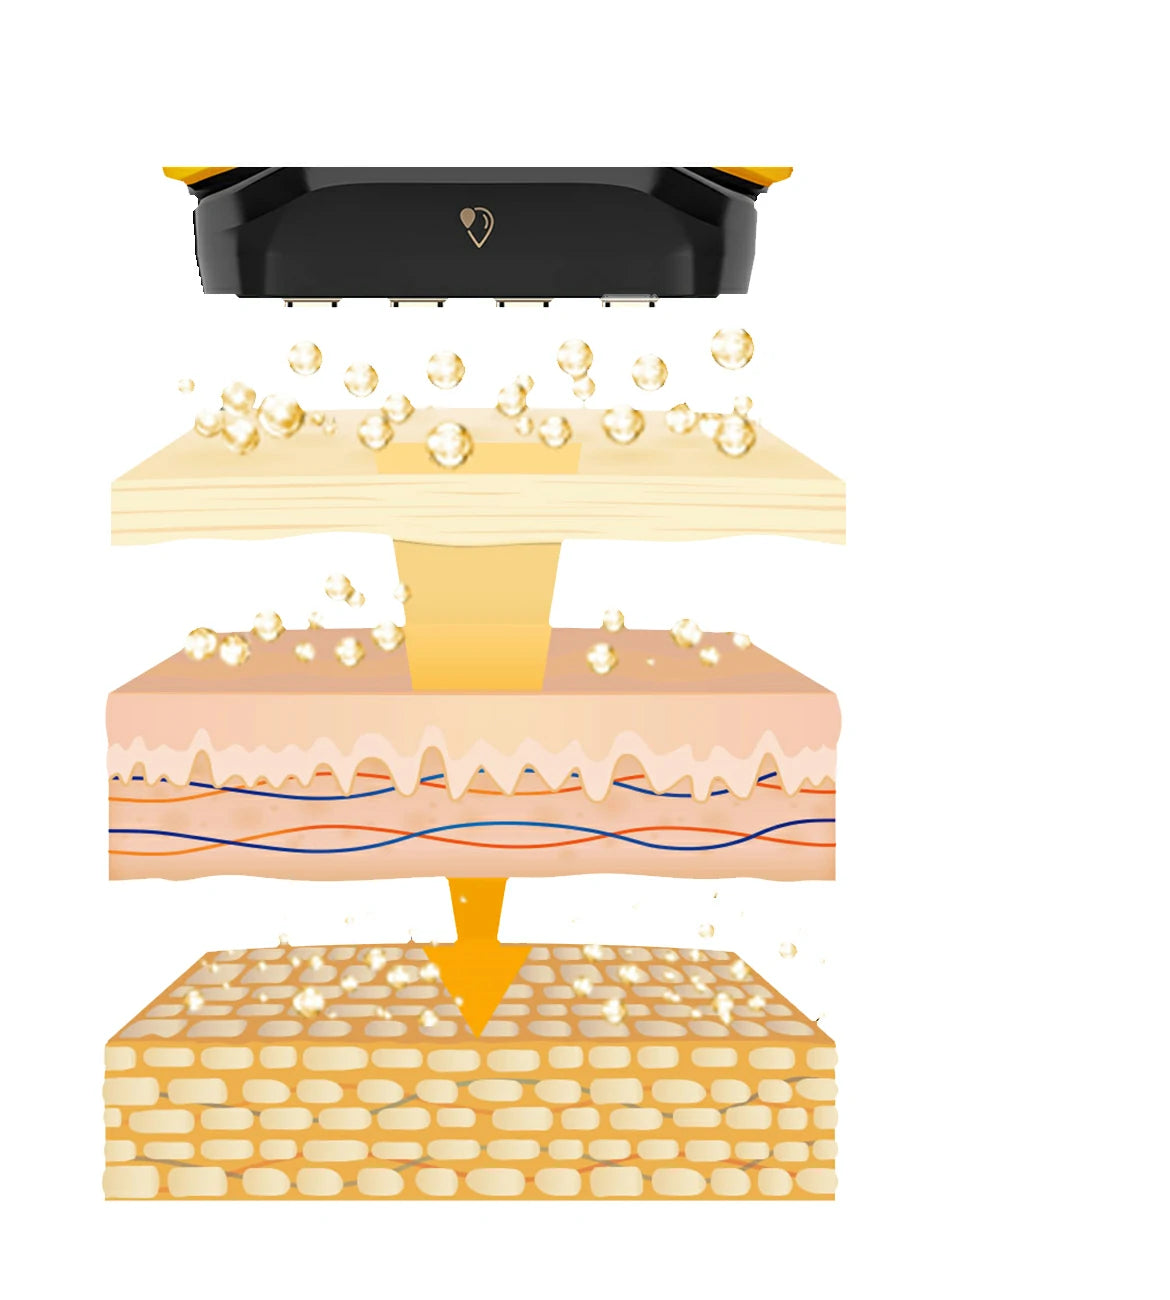 Illustration showing ion moisture technology from a skincare device penetrating through the skin layers to hydrate and rejuvenate.